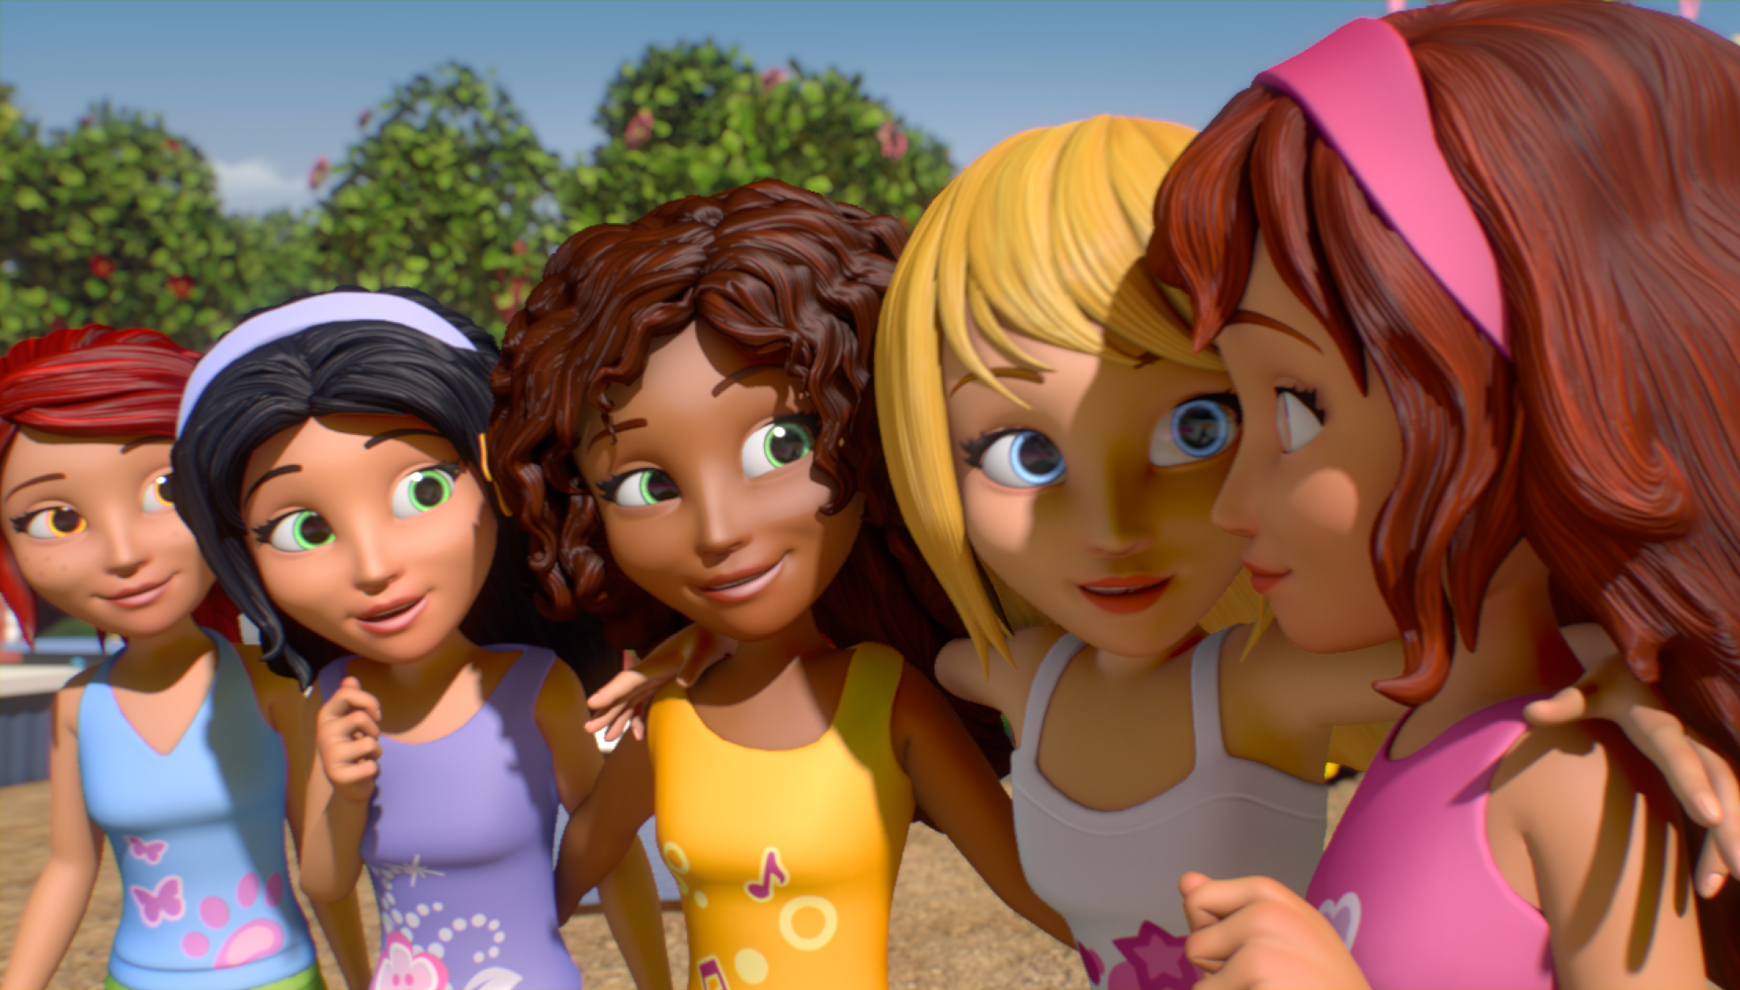 Lego Friends: New Girl in Town (2012)